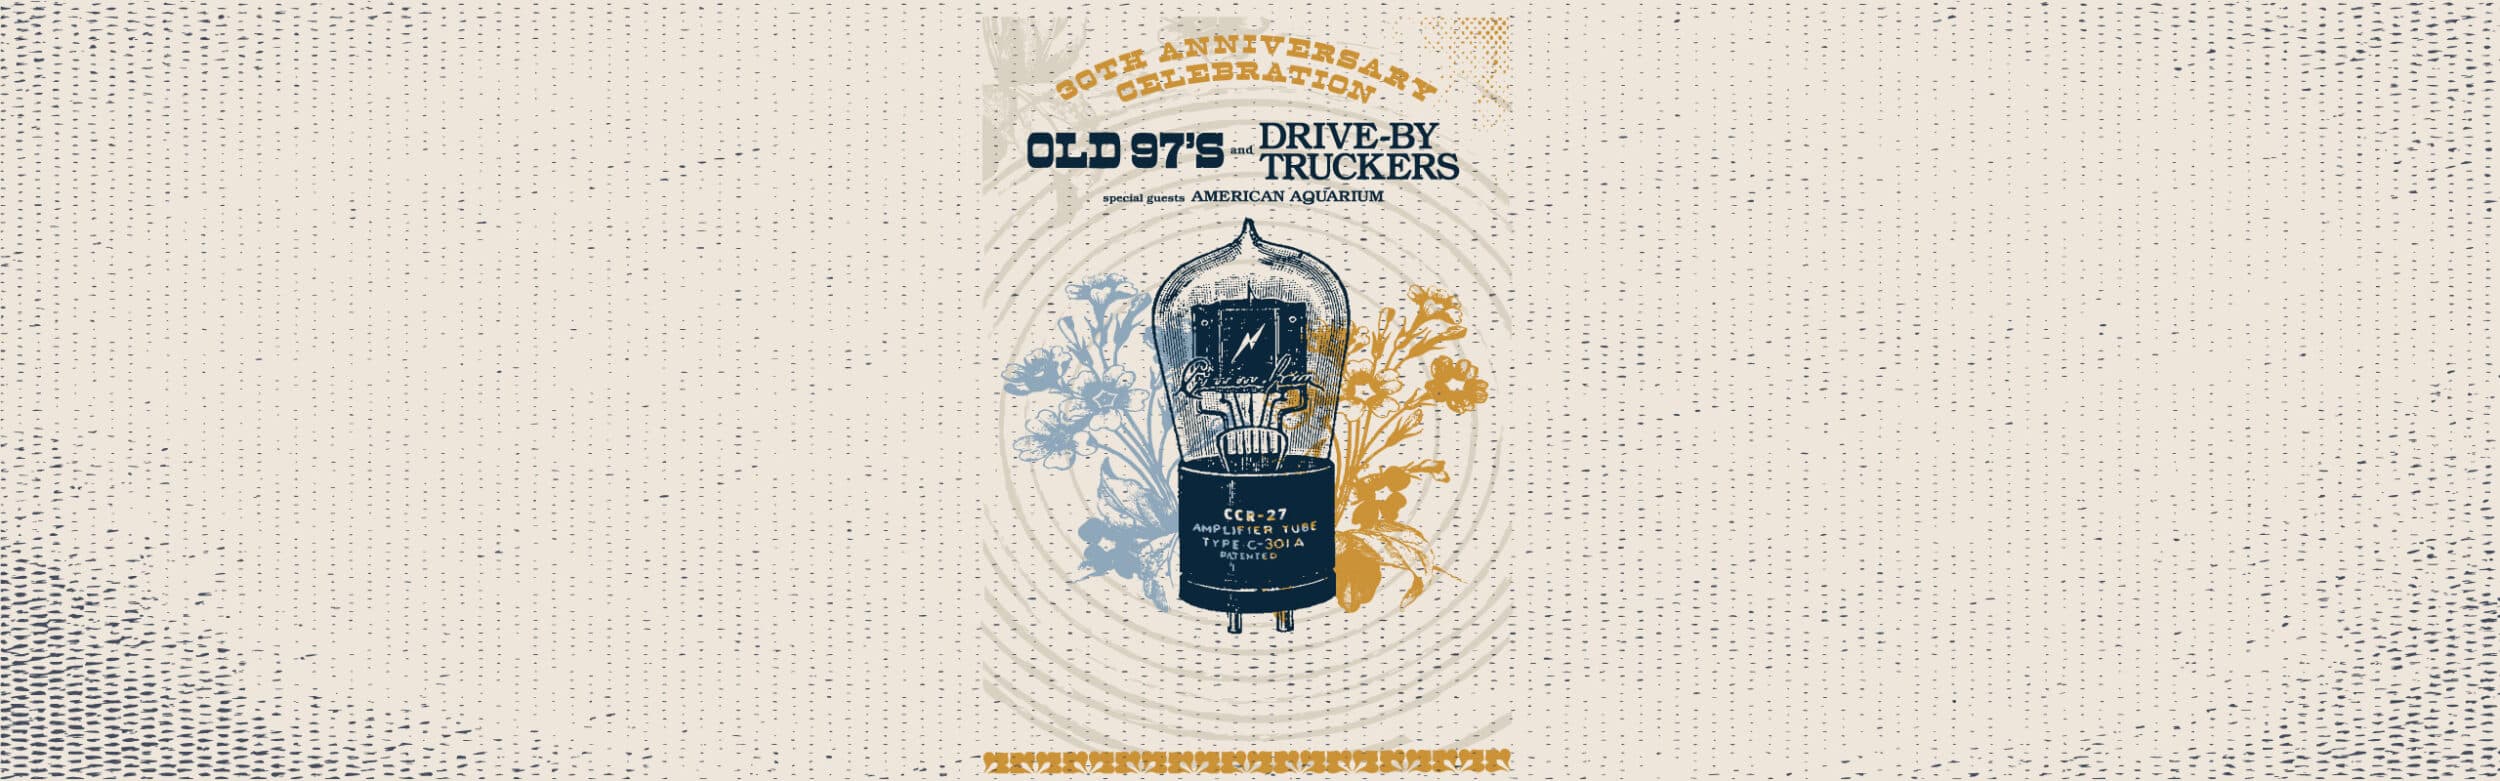 Old 97’s 30th Anniversary Celebration with Drive-By Truckers